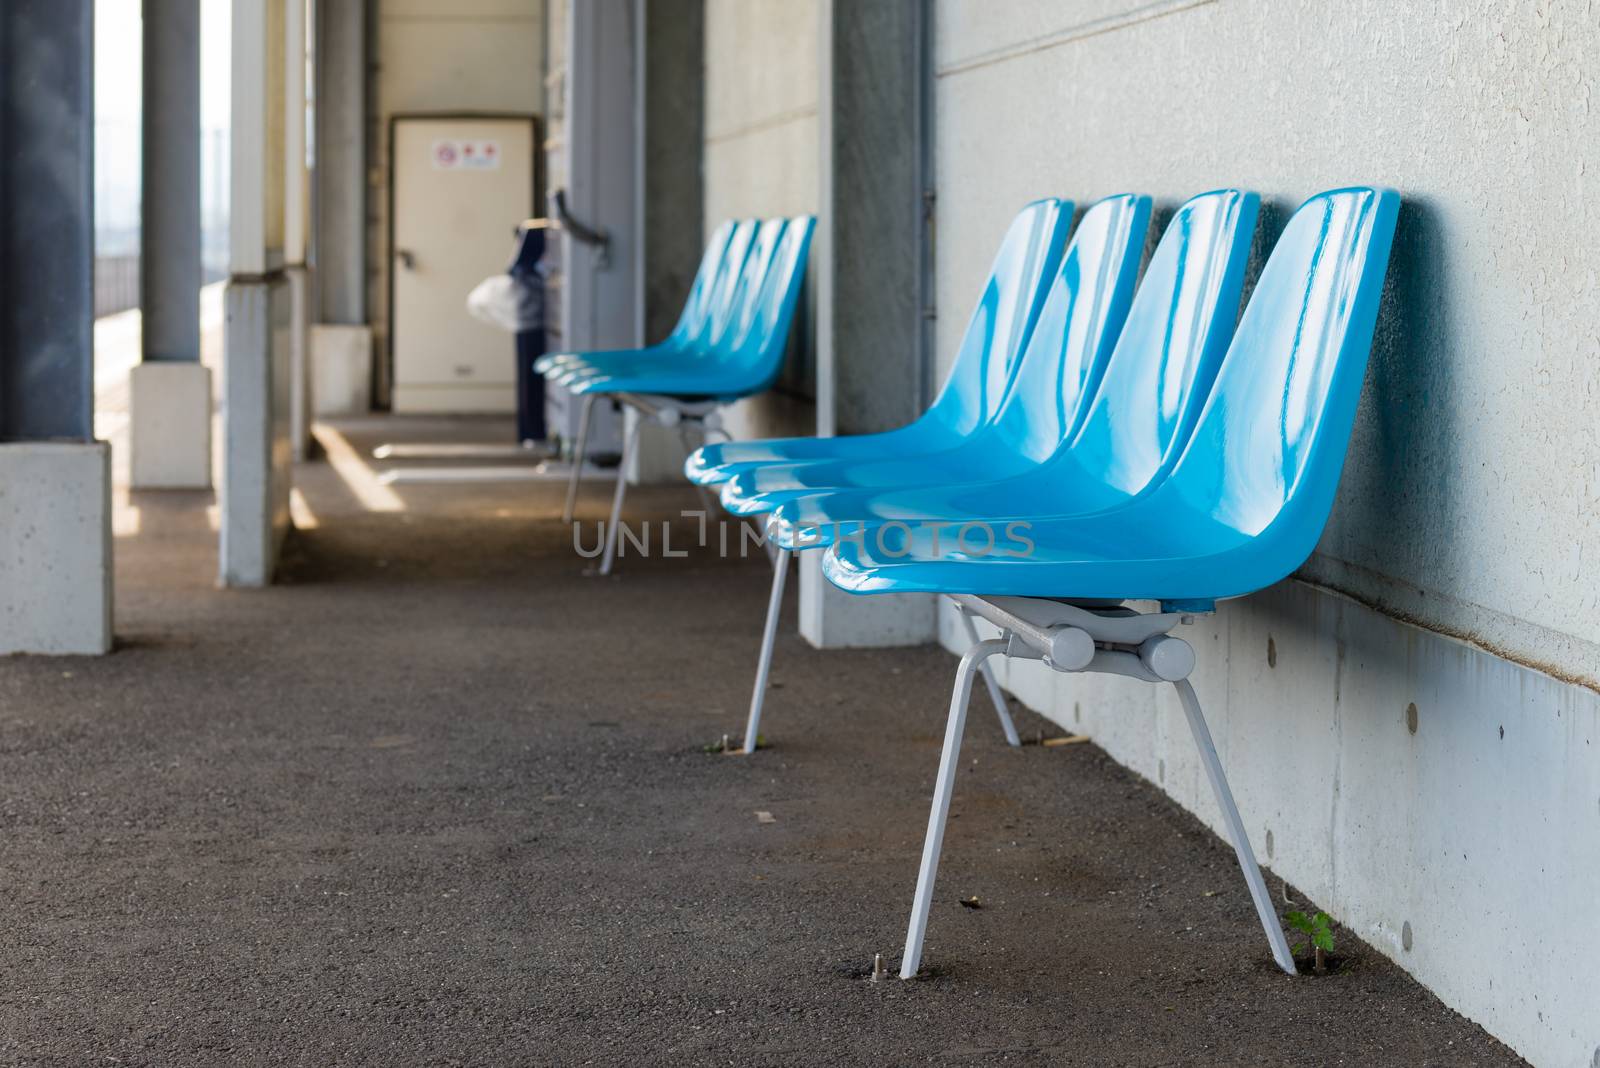 Empty plastic blue chairs at a train station in the countryside of Kochi, Japan.